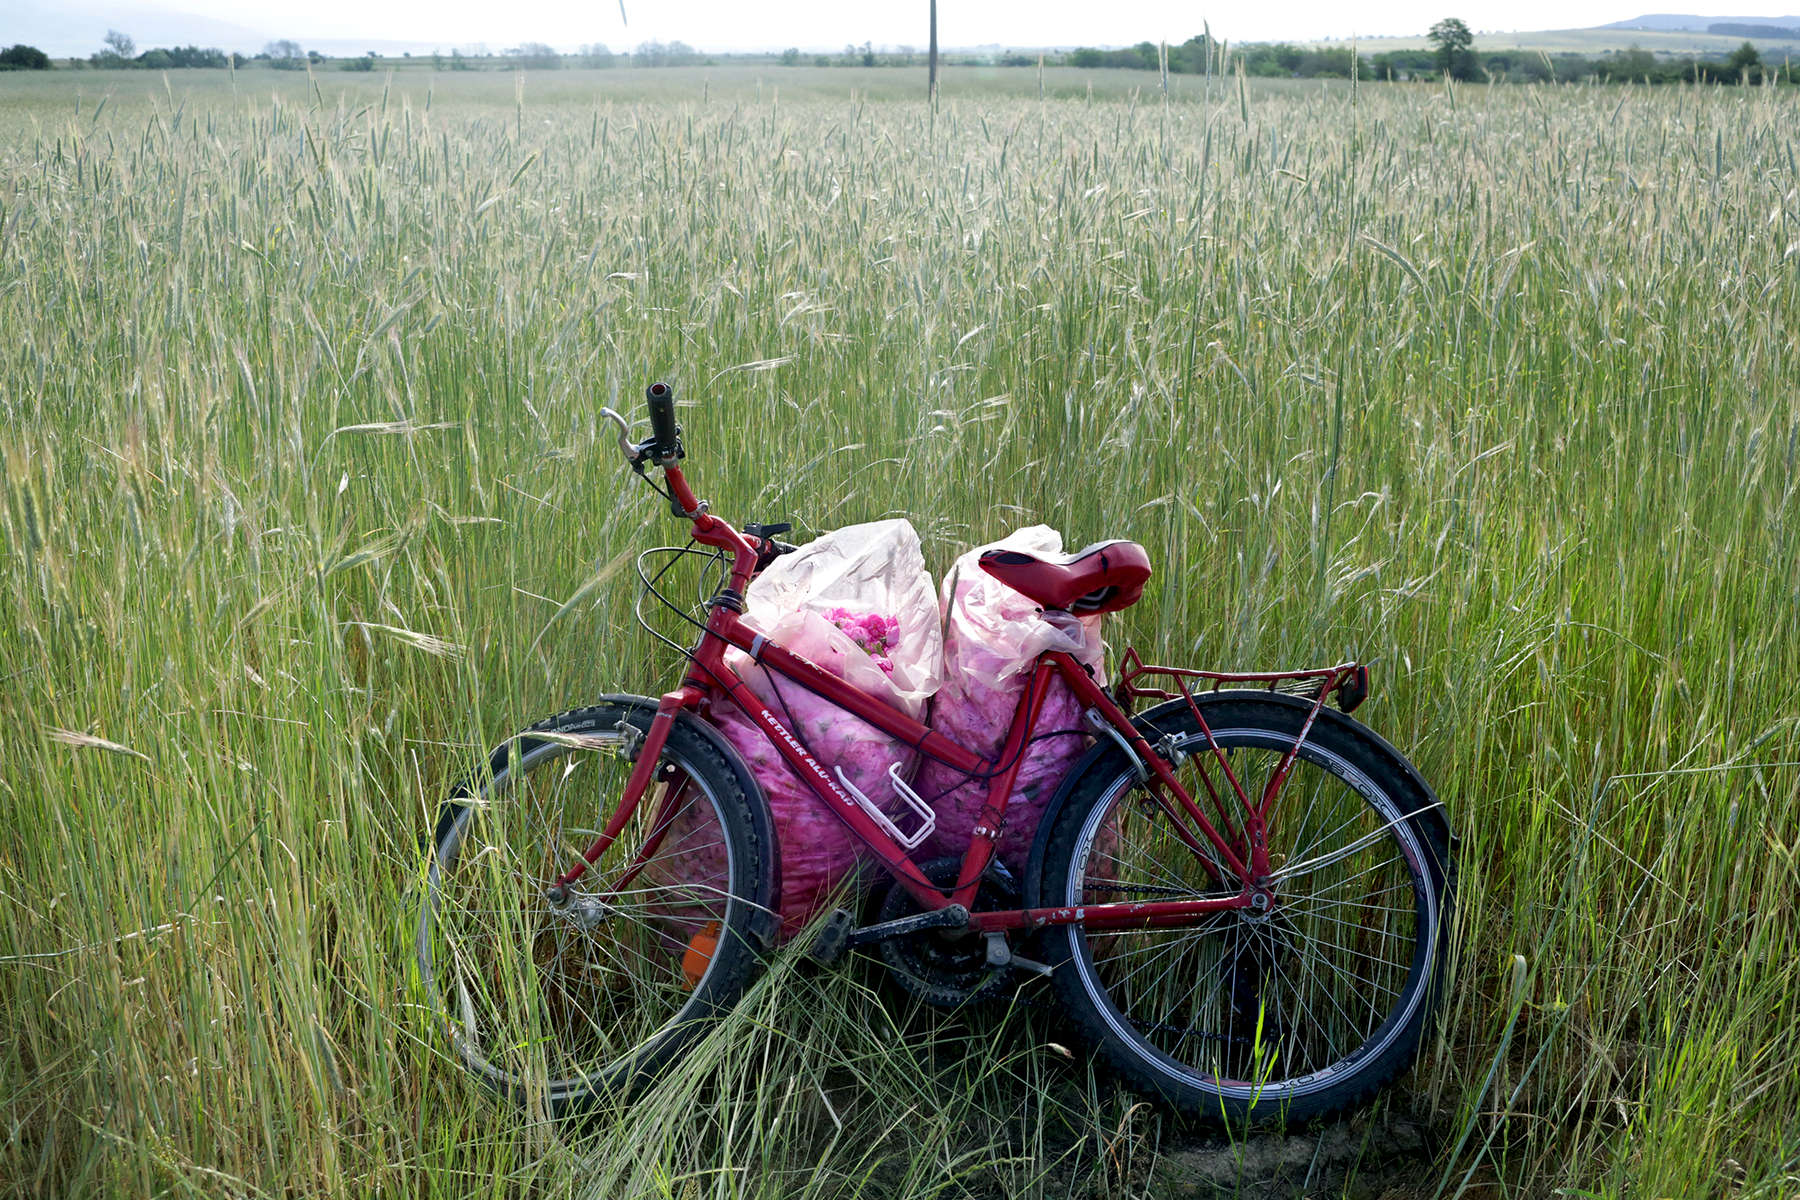 A bike and a bag of roses, in a field of wheat across from rose gardens in Osetenovo, Bulgaria on May 29, 2018.The most common oil-bearing rose of Bulgaria's Rose Valley is the pink-petaled Rosa Damascena Mill. Scientists unofficially call its local population Rosa Kazanlika, in honor of its breeding ground, Kazanlak - a town regarded as the heart of the valley. Kazanlak boasts a Rose Festival with traditional rose-picking and distillation in the mountains, folk dances, roses ensconced in cakes, soaps, jewelry, wine and rakia (a regional 80-90 proof fruit brandy,) and even a parade in honor of its very own Rose Queen, picked from a pool of high school graduates. The birth place of Rosa Damascena is unclear, but many accounts trace it to Damascus, Syria’s capital (hence, some say, the name,) yet others to Ancient Persia in Iran - and Bulgaria’s local rose population, to a Turkish merchant in the 17th century. Since Rosa Damascena no longer grows in the wild on its own, it must be cultivated. The sloping valley stretches for about 140 kilometers across a narrow interval between the Balkan mountain range (otherwise named Stara Planina, or Old Mountain in Bulgarian,) and Sredna Gora (Midland Forest) mountain. Once also known for making pistols, ammunition and automatic weapons under Communism, it is now simply famous as the source of an oil likened to “liquid gold.” Rose oil is thus nicknamed for a reason - it takes an average of 3.5 tons of roses to produce just one kilogram of rose oil, with that kilogram valued between 6,000 and 12,000 euros. Roses like sandy, permeable, clay-free soil, and a clear, sunny climate with mild winters and enough atmospheric humidity during the spring and their summertime flowering period. These are just the conditions found in The Rose Valley - the mountain ranges and two rivers, its shield against atmospheric volatility. In the Valley, it is usually sunny but cool before noon, with hotter, sometimes rainy afternoons. These temperature amplitudes during the flowering period provoke the production of rose oil, which is formed as a defense reaction of the plant. The rose flower is very sensitive, and its oil resides in the top layers of the flower, so it evaporates easily with rising temperatures. Cold dew drops in the morning hinder the evaporation of oil, and the moist air preserves the plant’s moisture, turgor and oil content, which is why farmers usually pick the flowers between sunrise and 11:00 a.m.Photo by: Yana Paskova for National Geographic Traveler